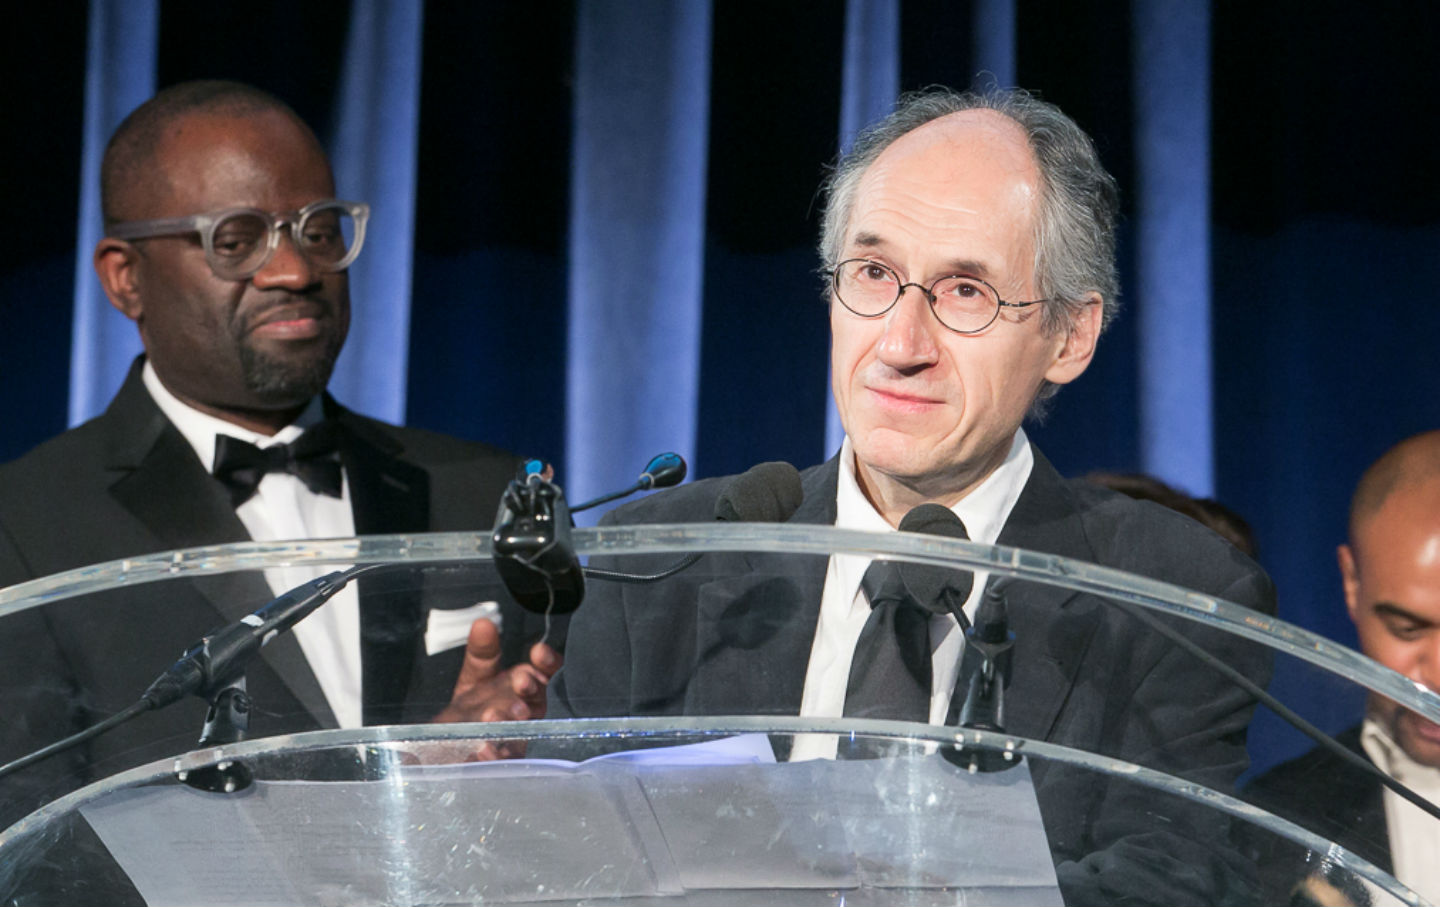 Why I Support PEN’s Courage Award to ‘Charlie Hebdo’